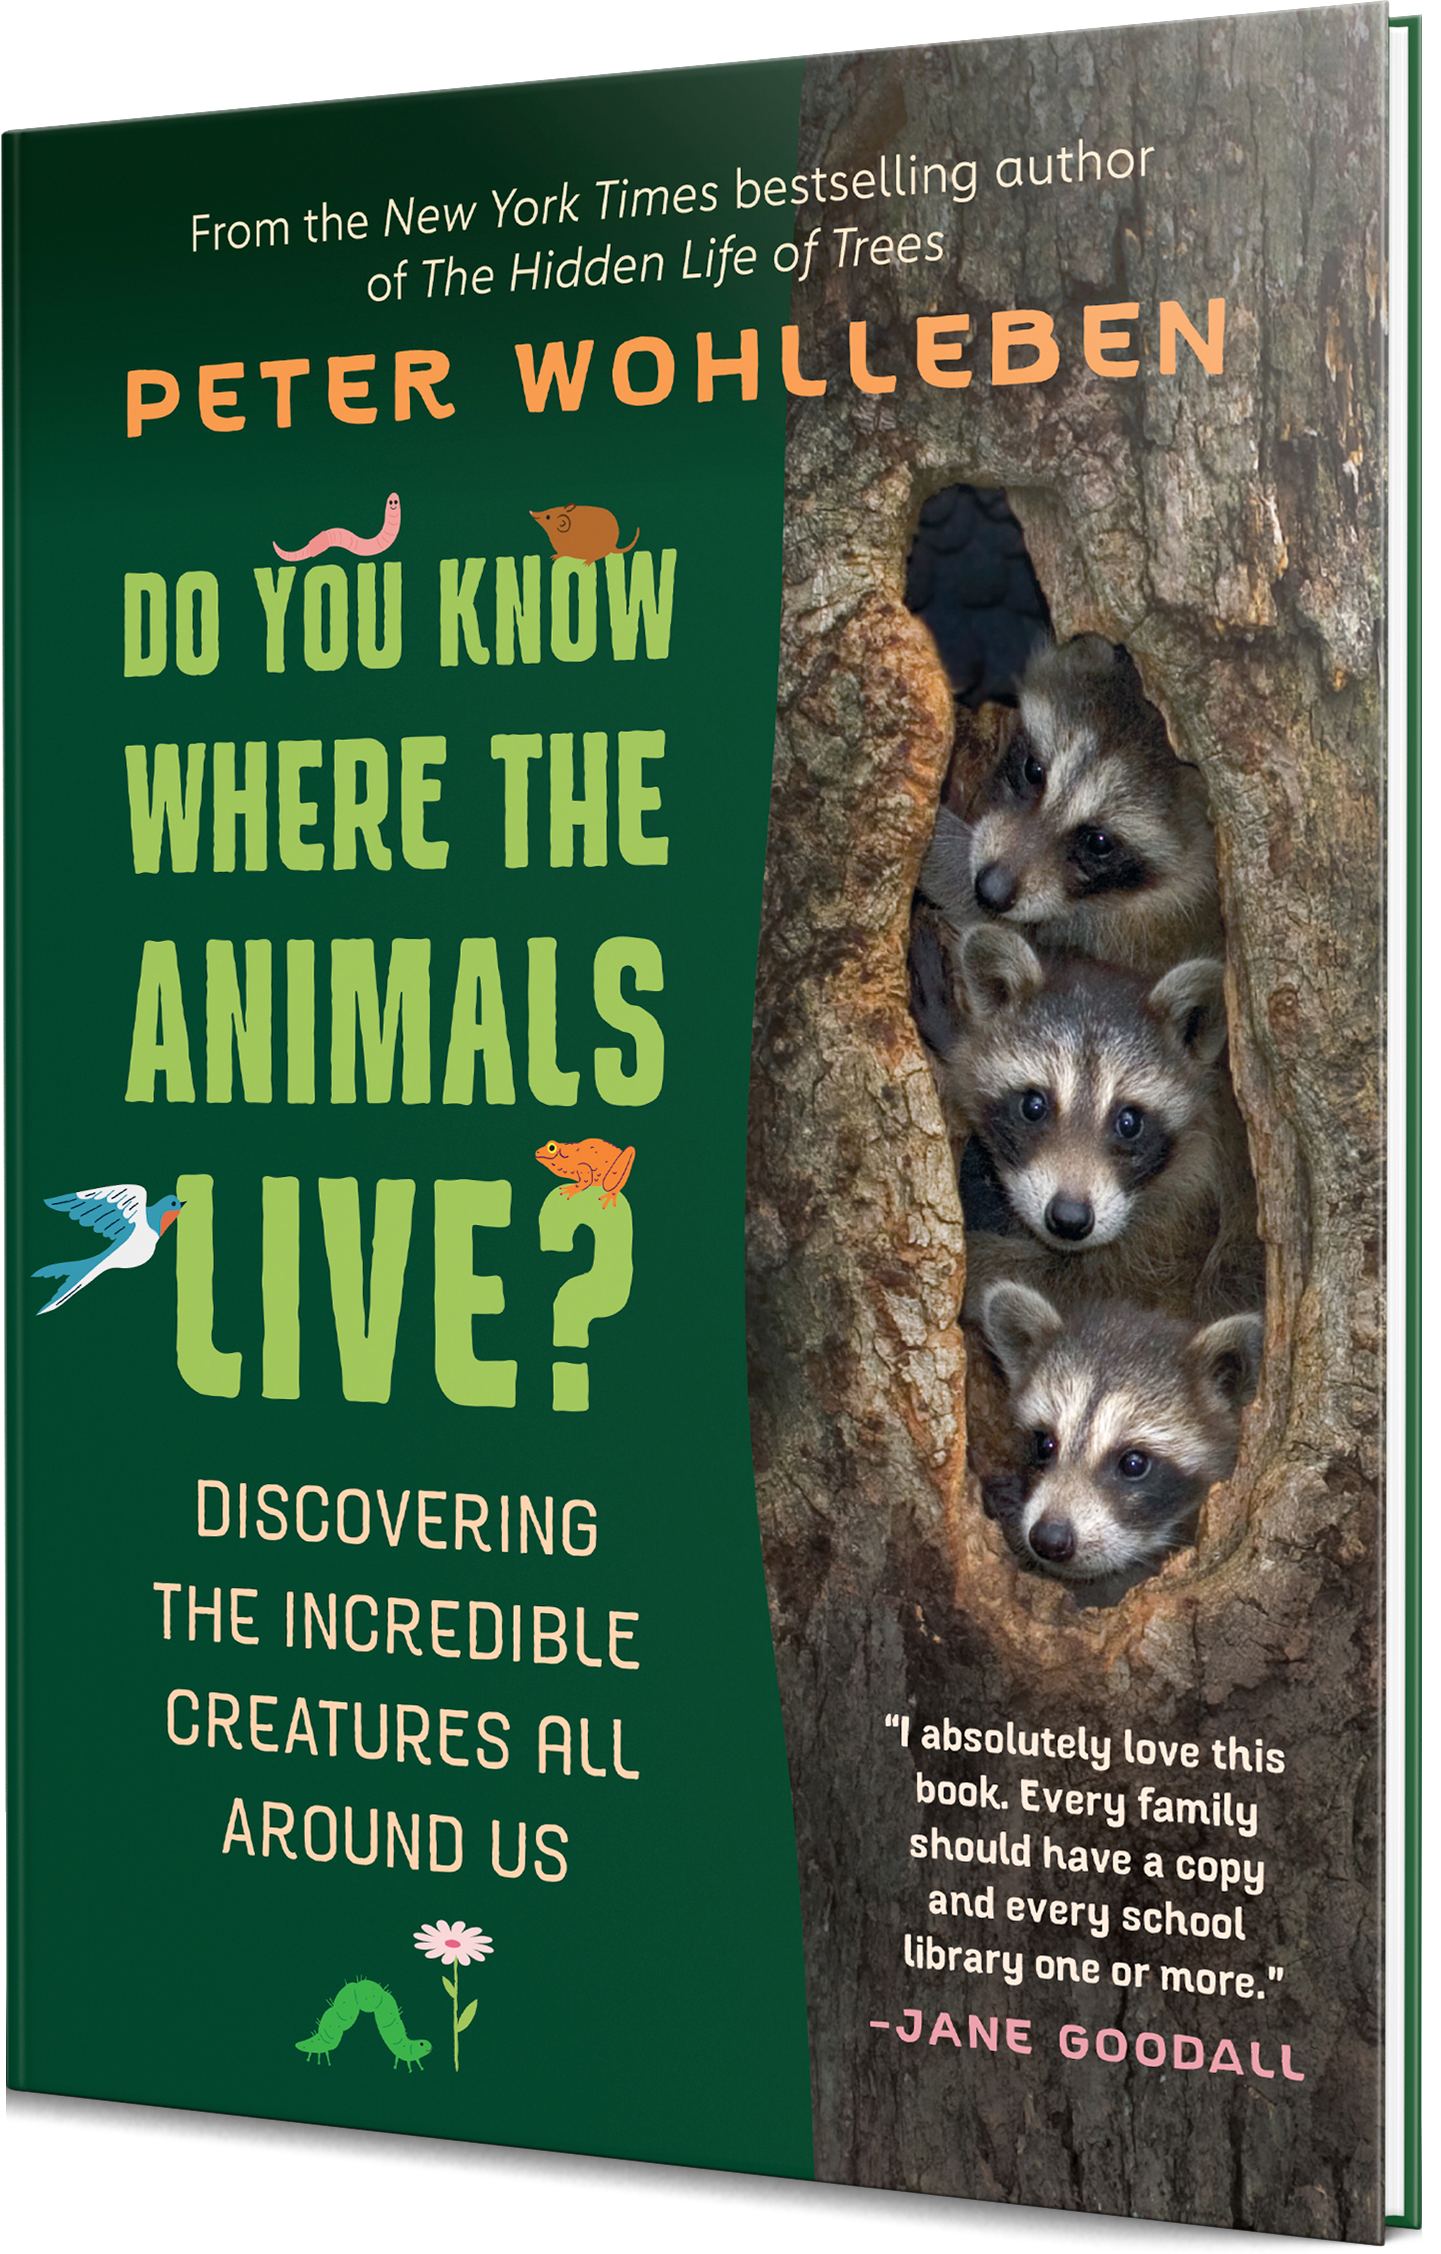 Do-you-know-where-animals-live.png